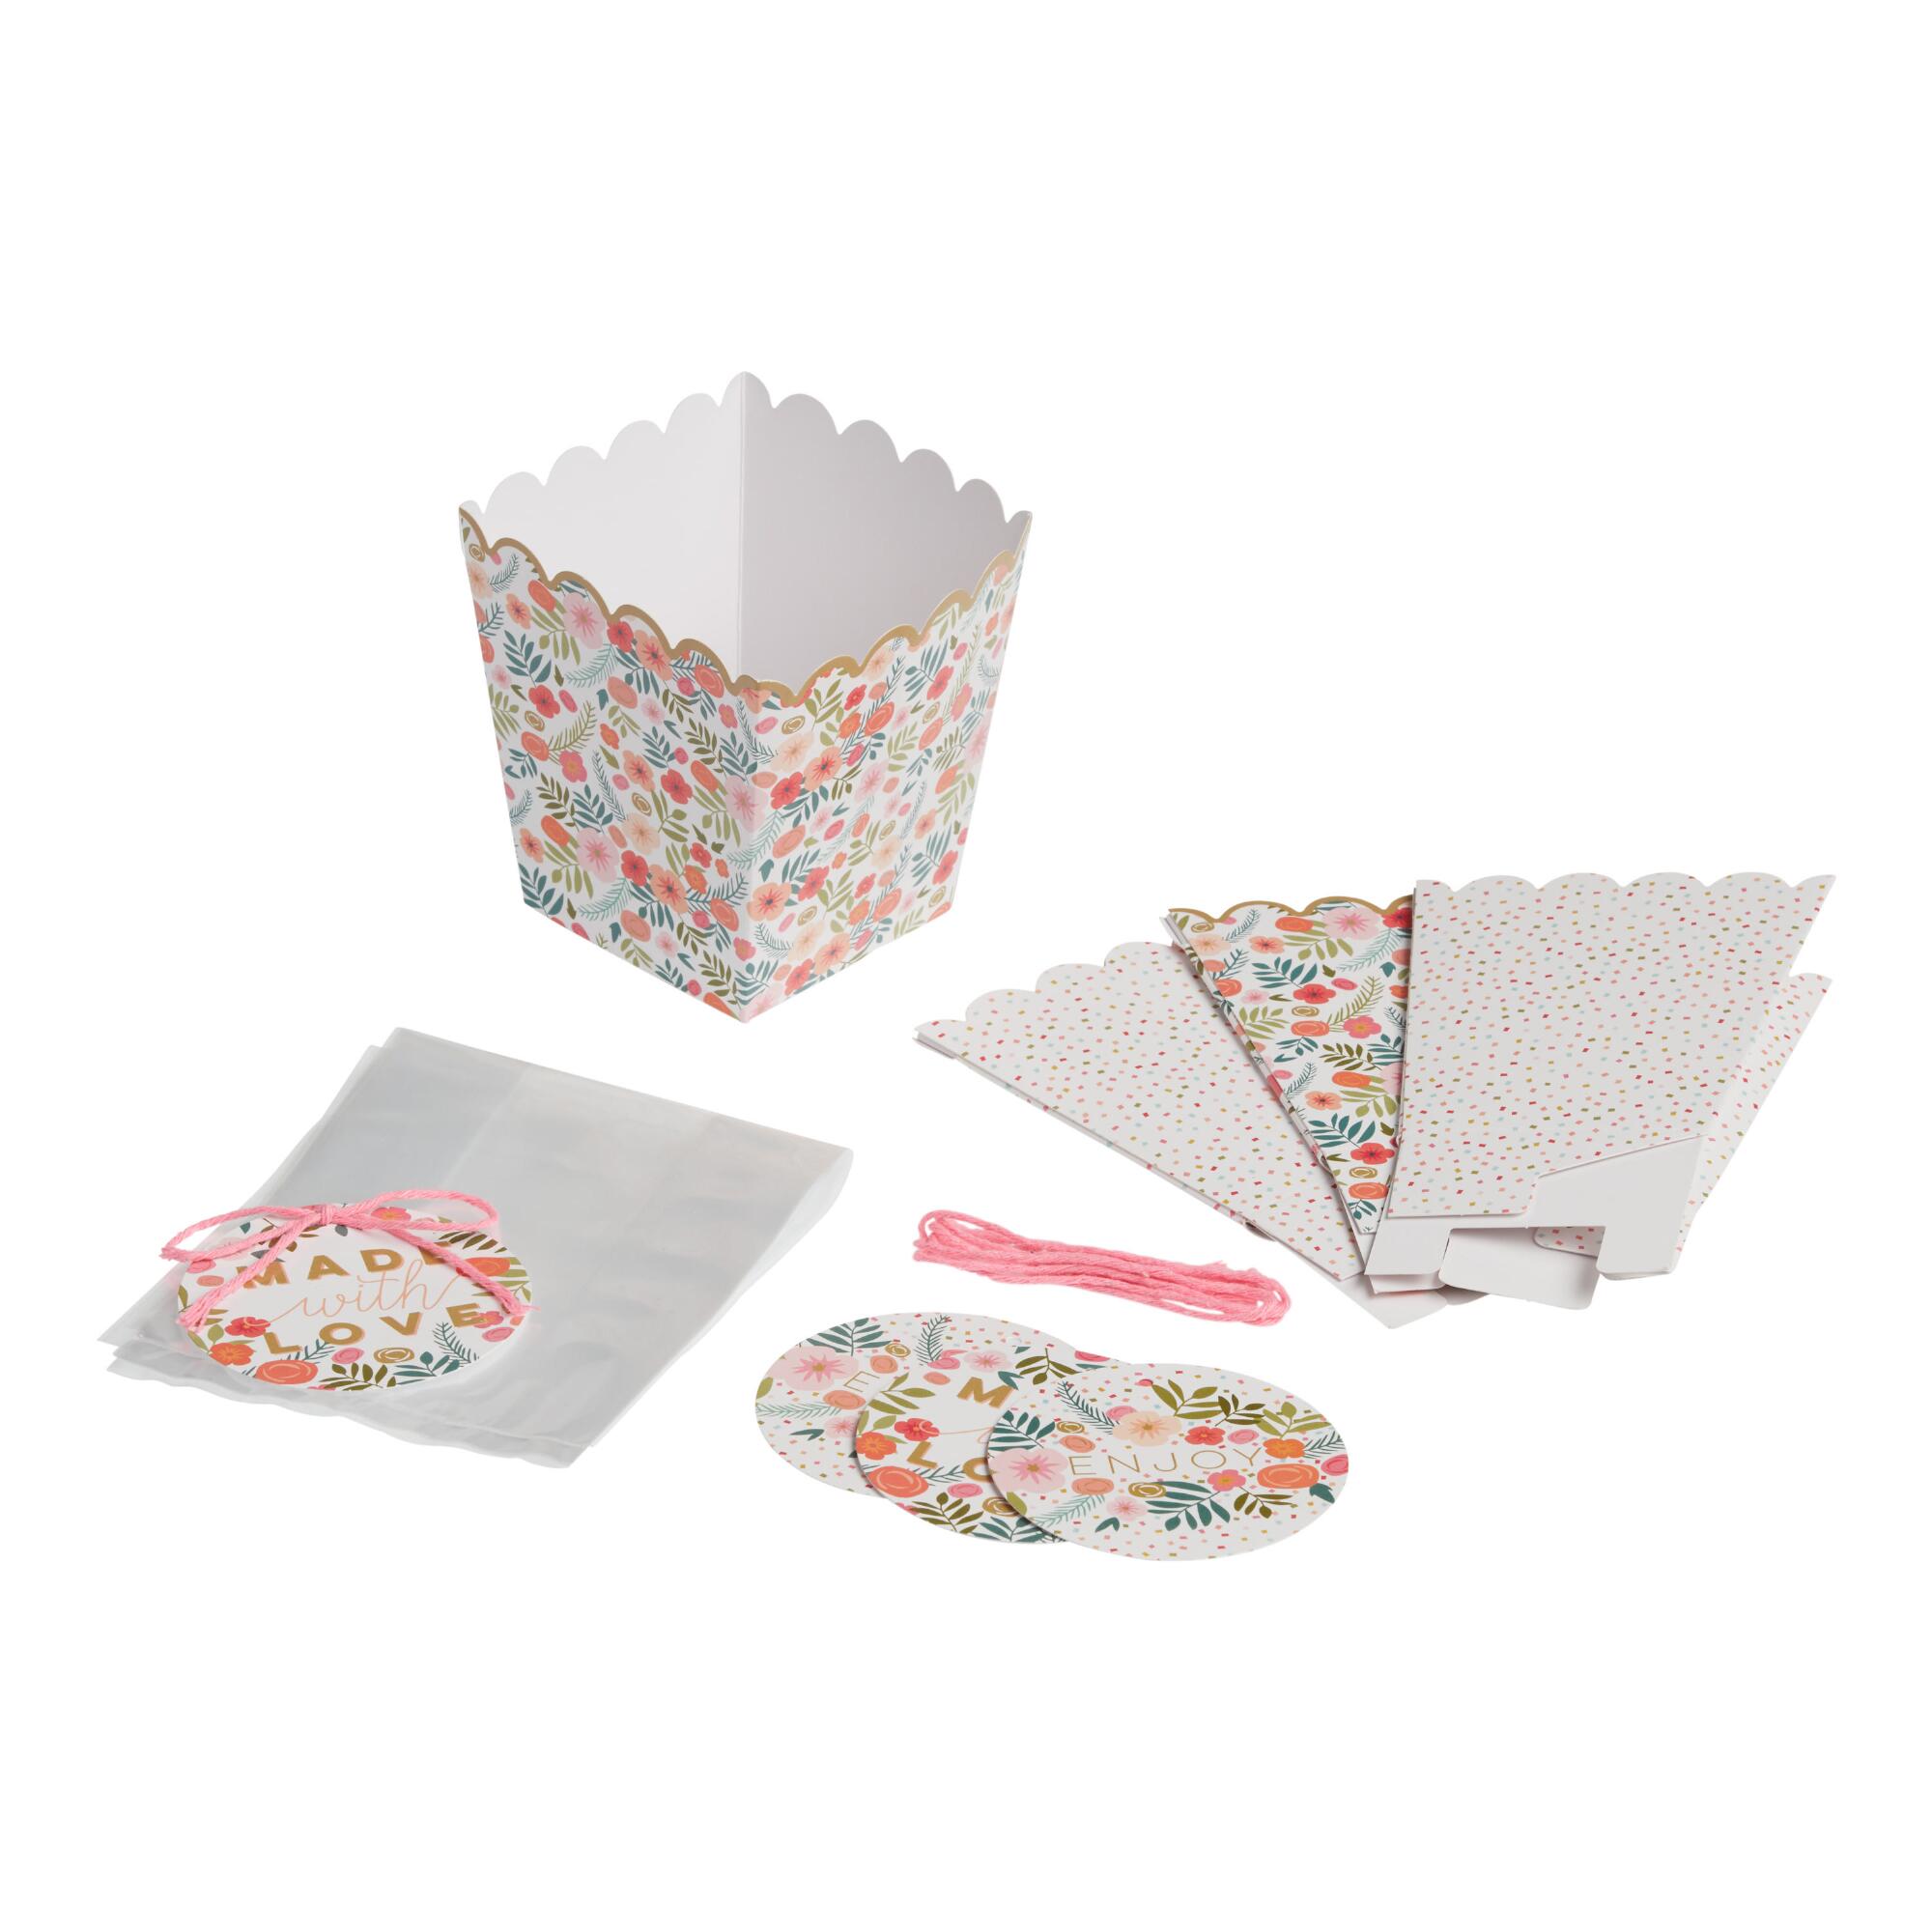 Spring Floral Treat Cup Gifting Kit 4 Pack by World Market